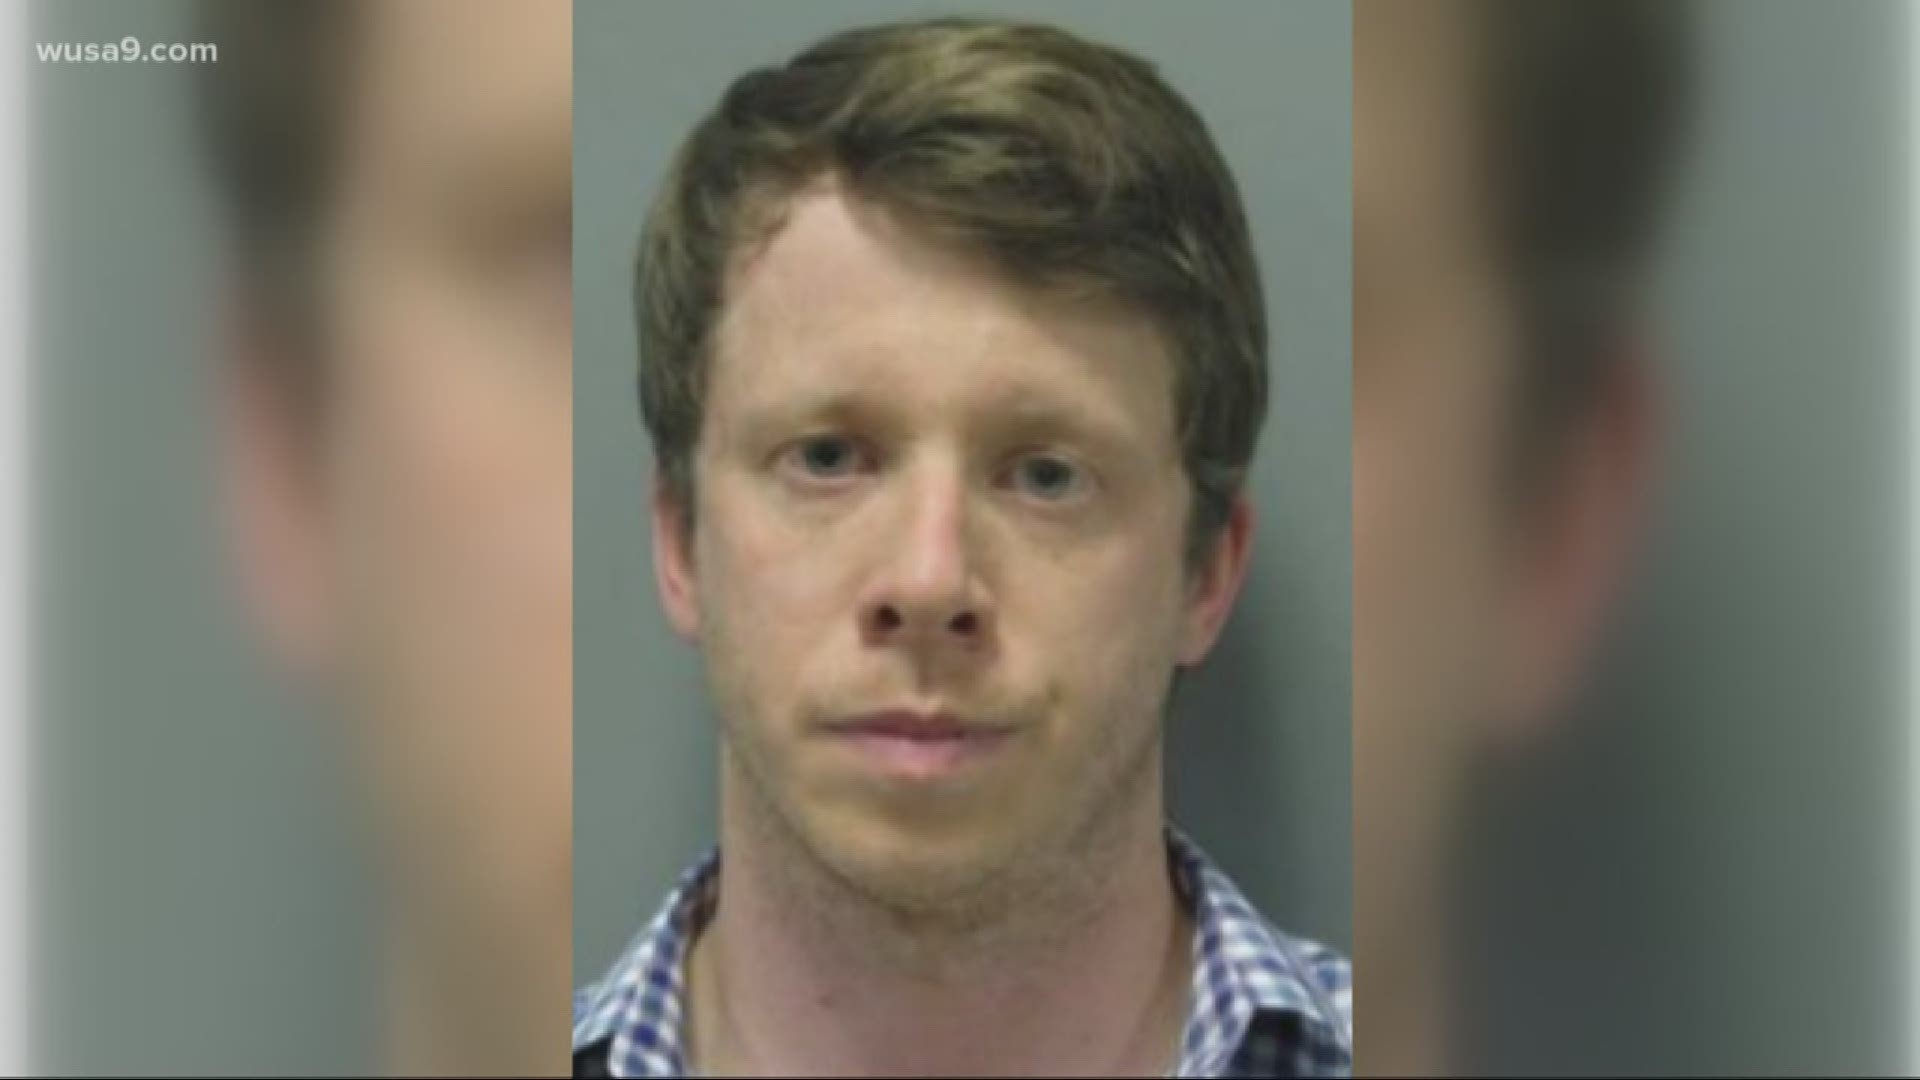 Maryland man, 32, arrested for having sex with 14-year-old girl, police say  | wusa9.com